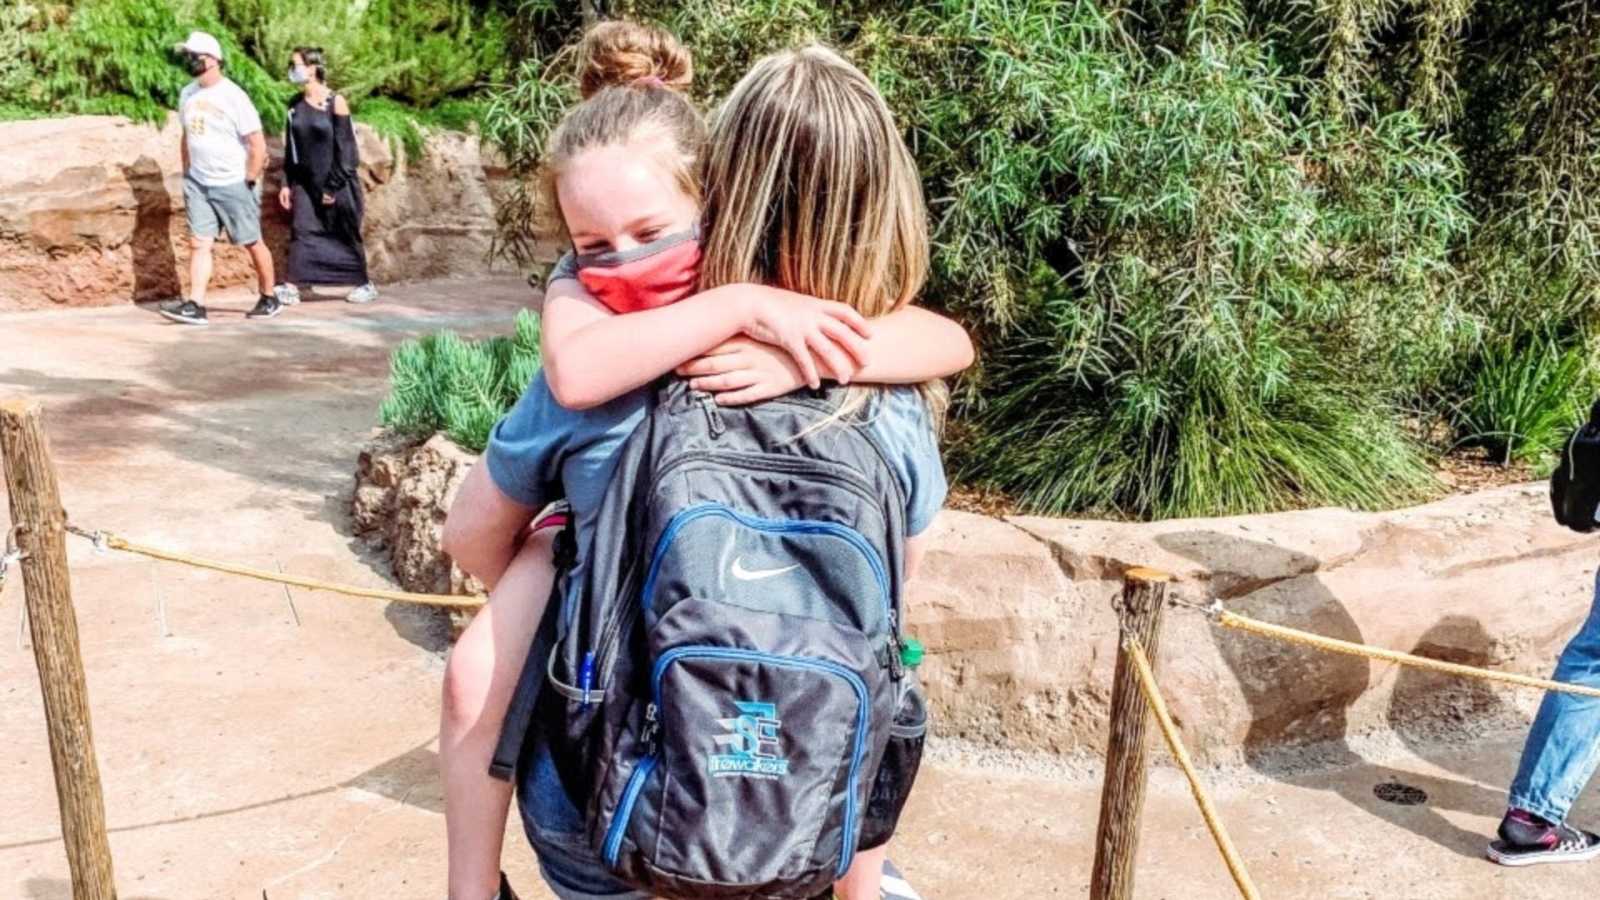 Girl mom proudly holds 9-year-old daughter during a trip at Disneyland